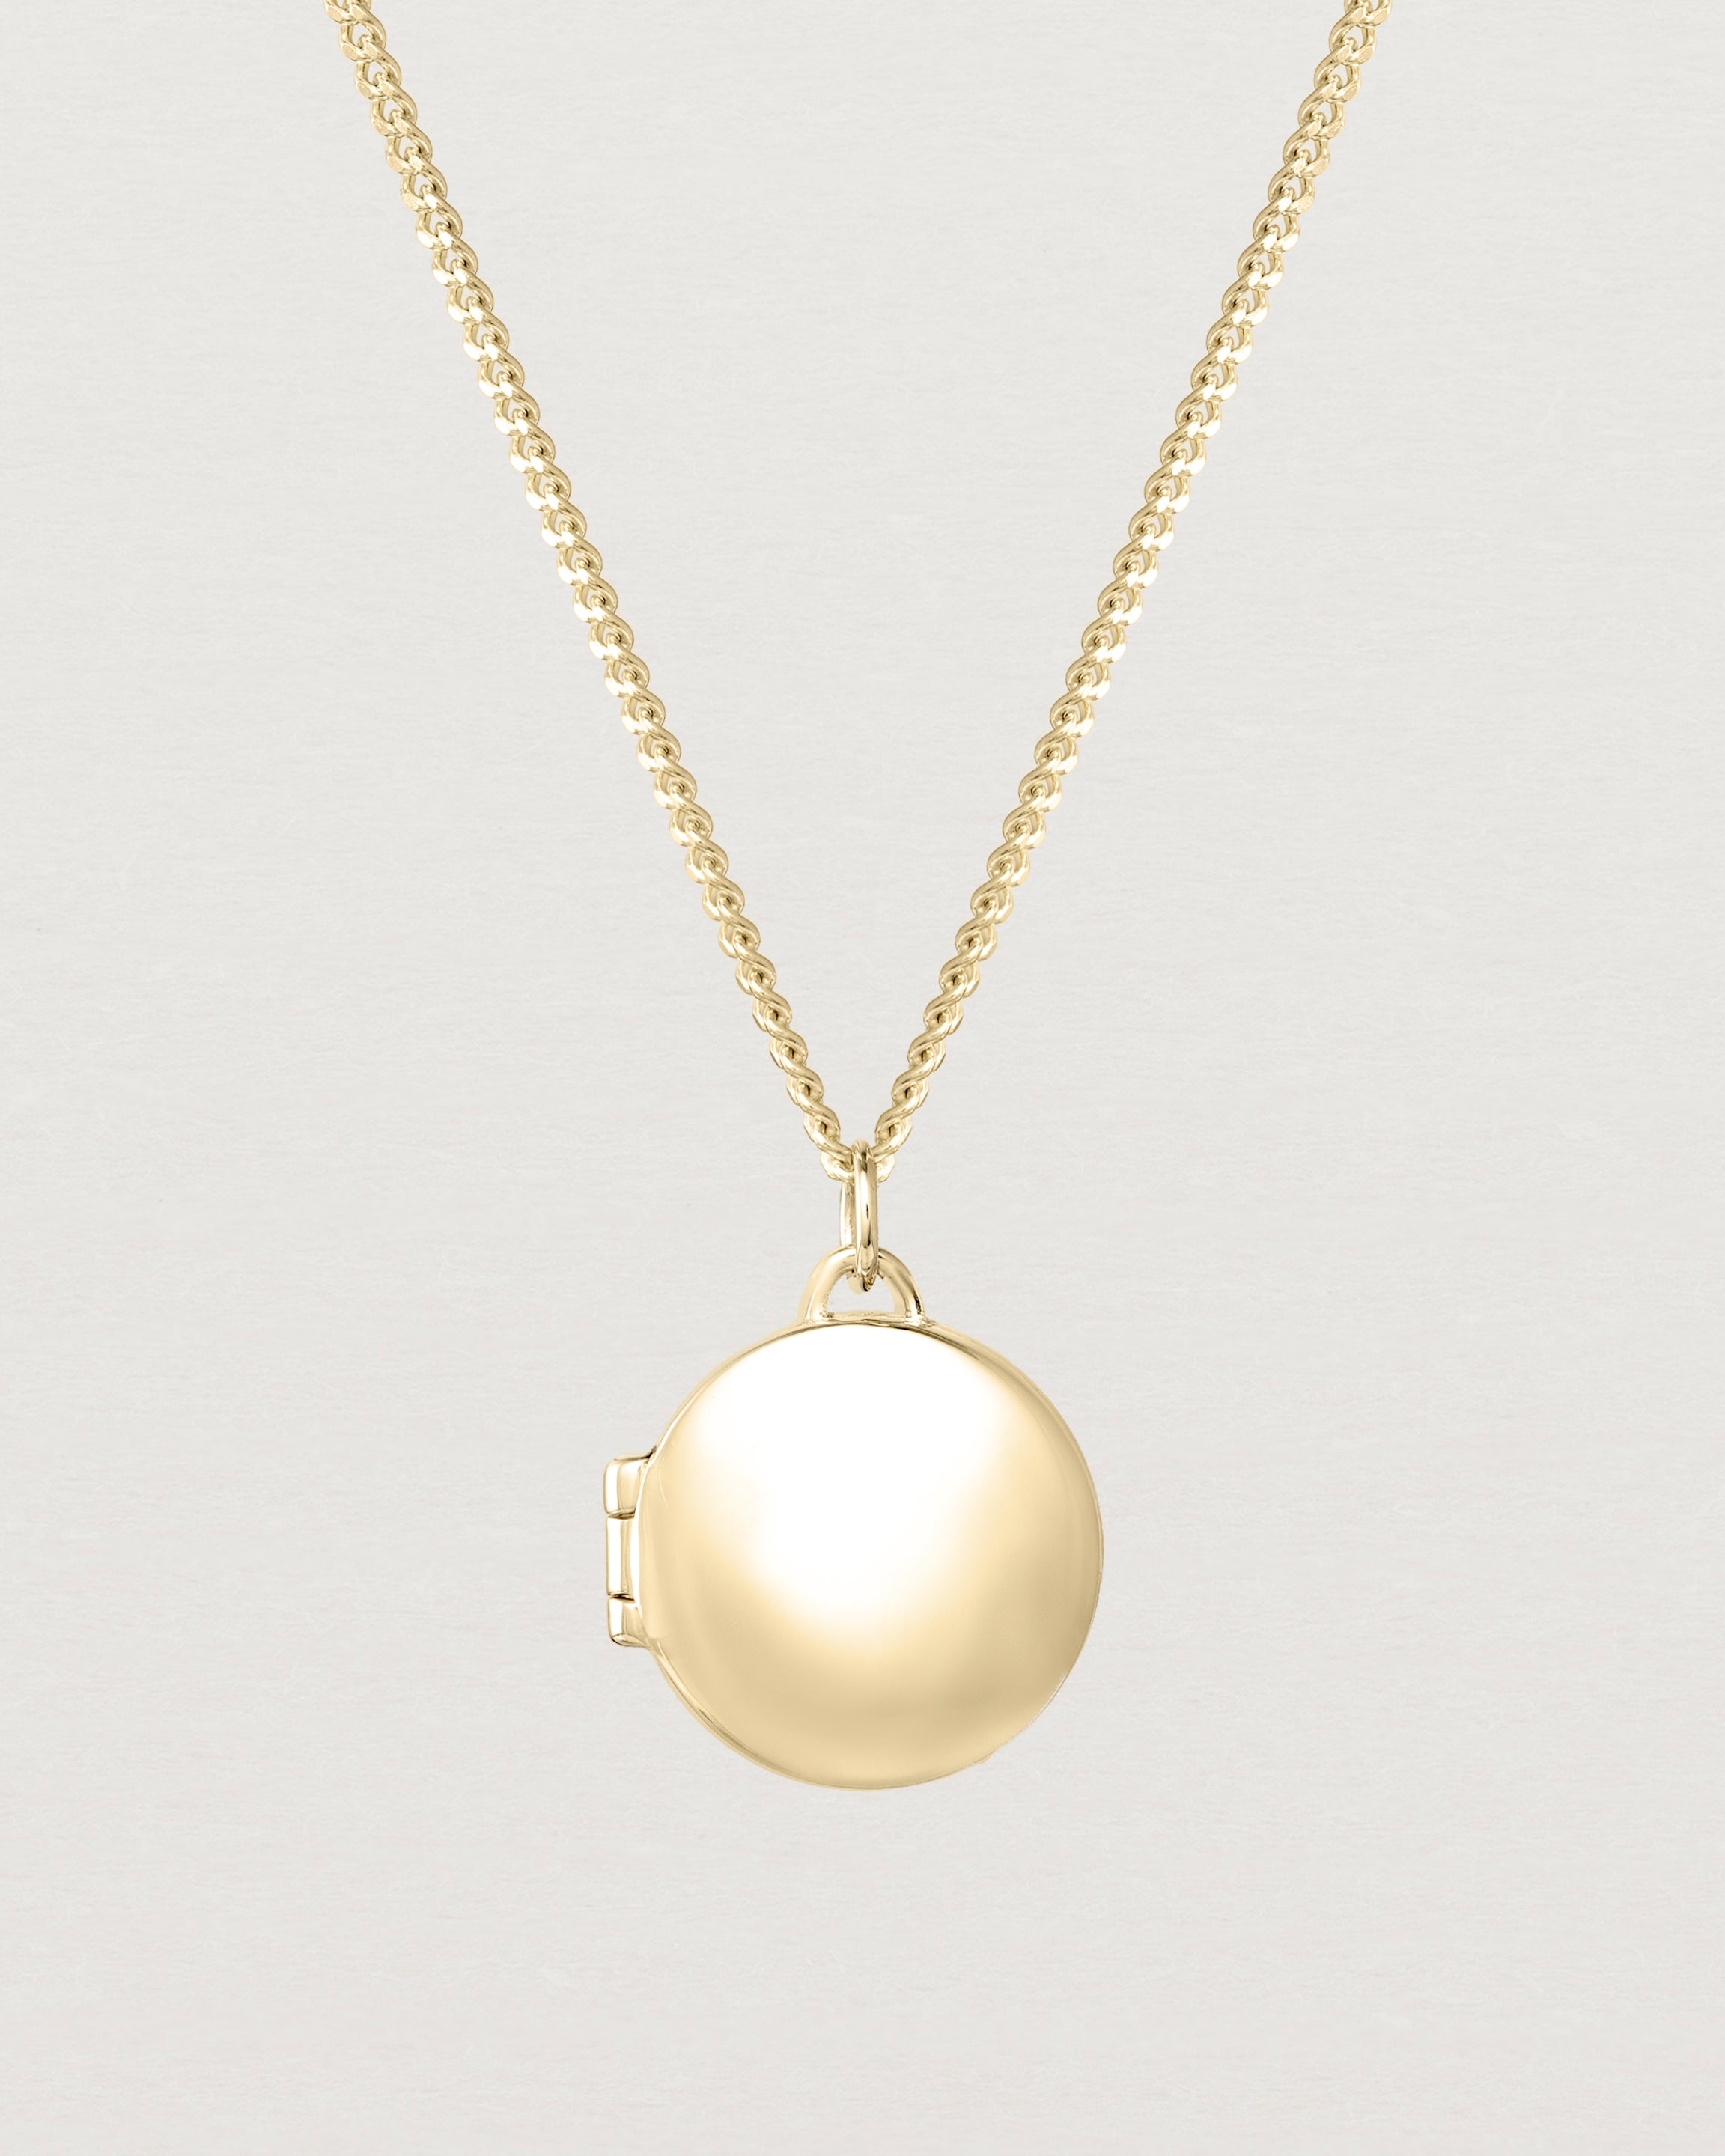 Back view of the Signature Locket in yellow gold.